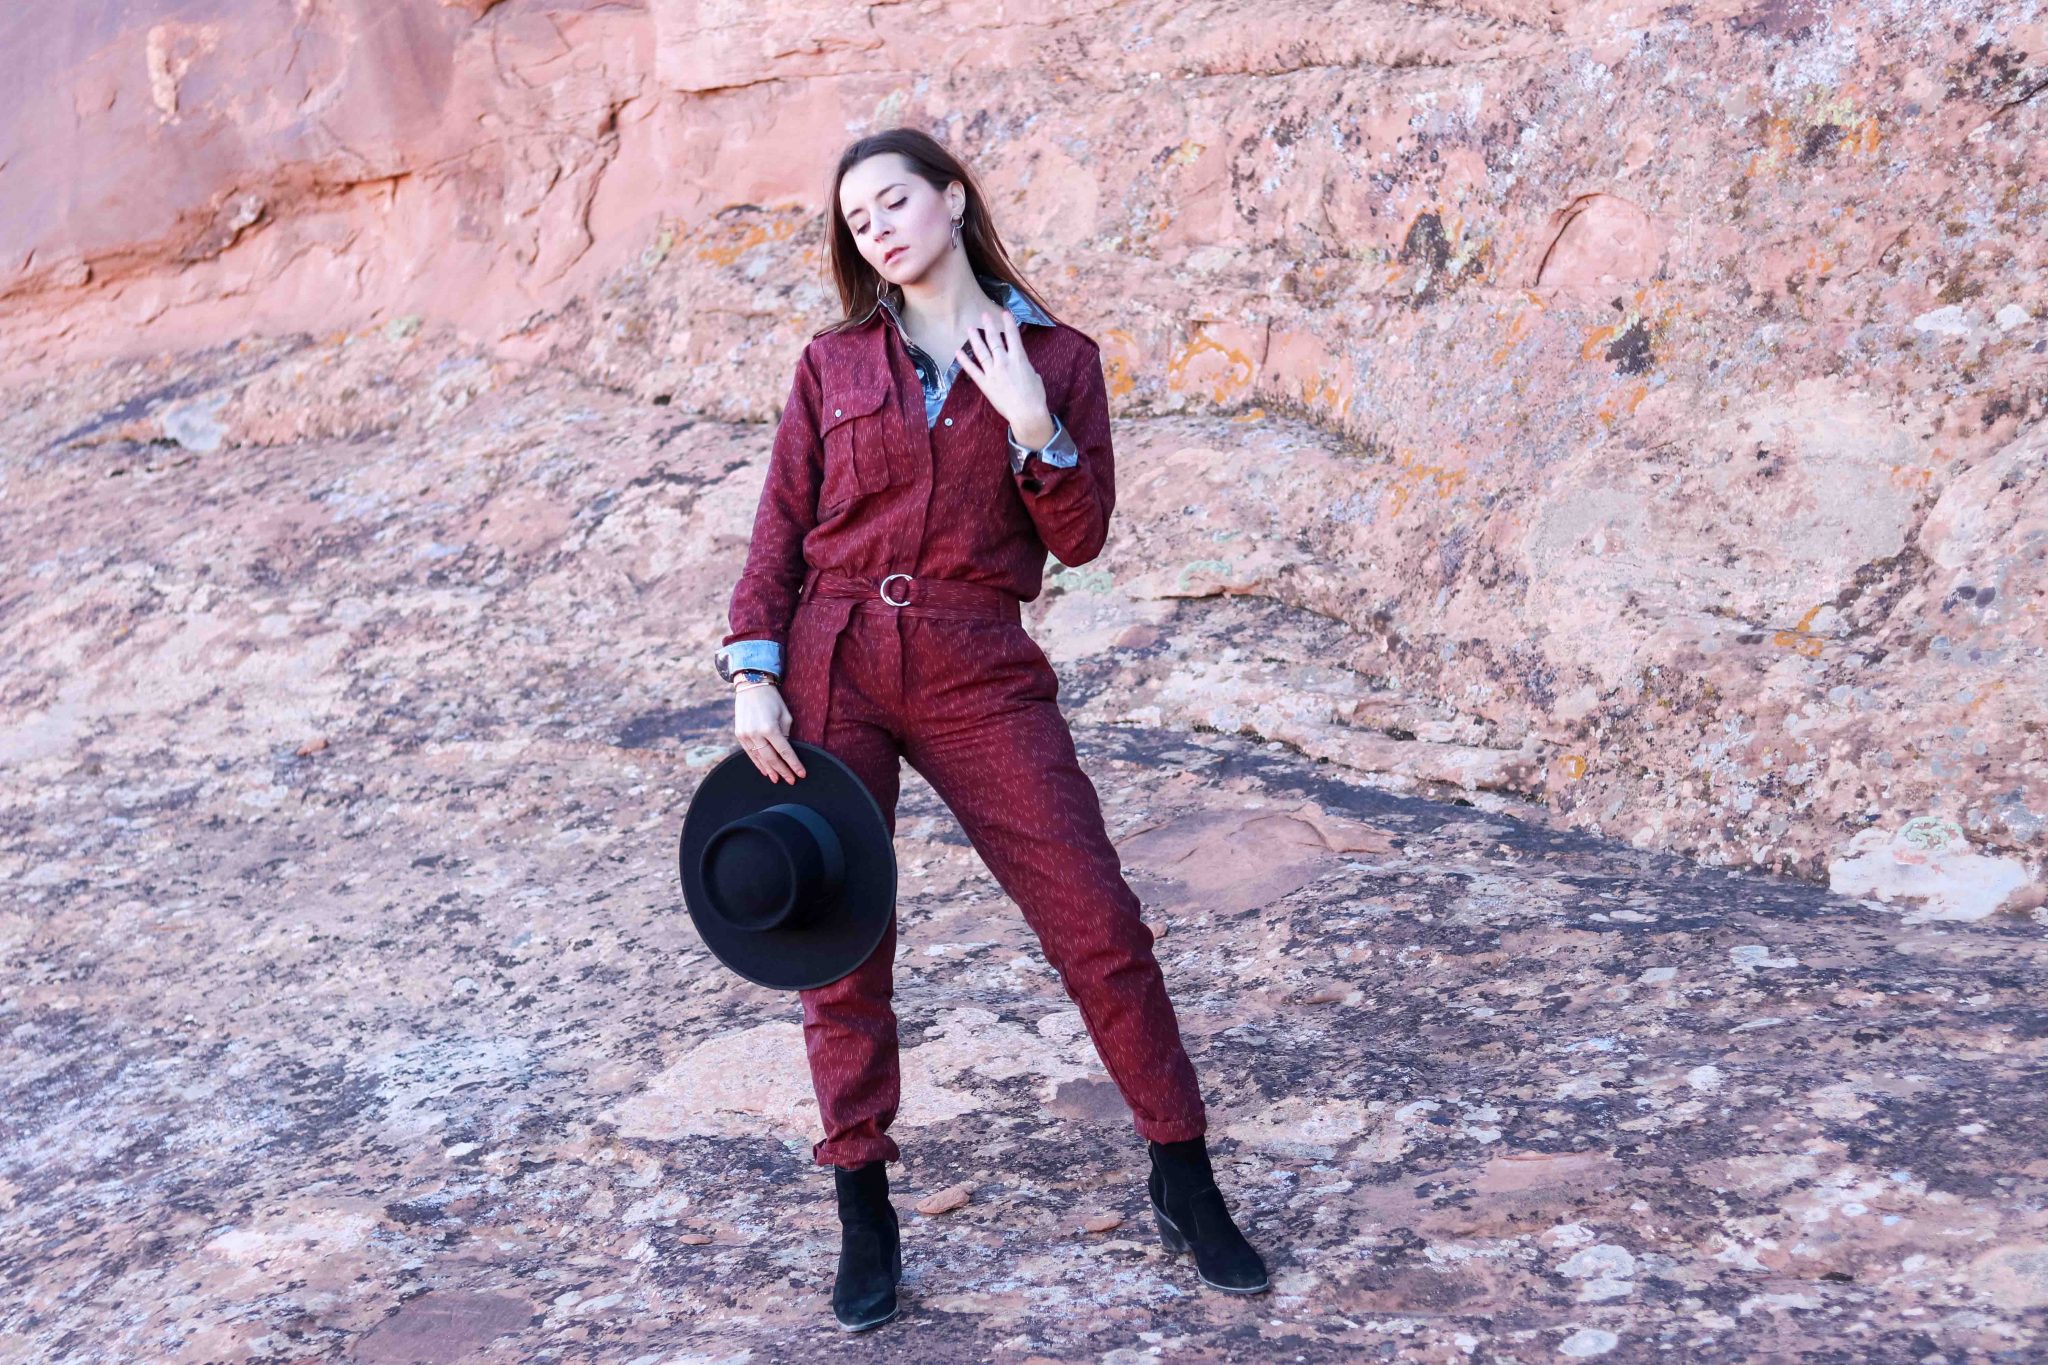 Fabric Hunted and Collected Jumpsuit - The Billie - ETHICAL FASHION - ARCHES - From Las Vegas to Moab: 5 tips for your road trip: Bryce Canyon, Arches National Park, Canyonlands national park